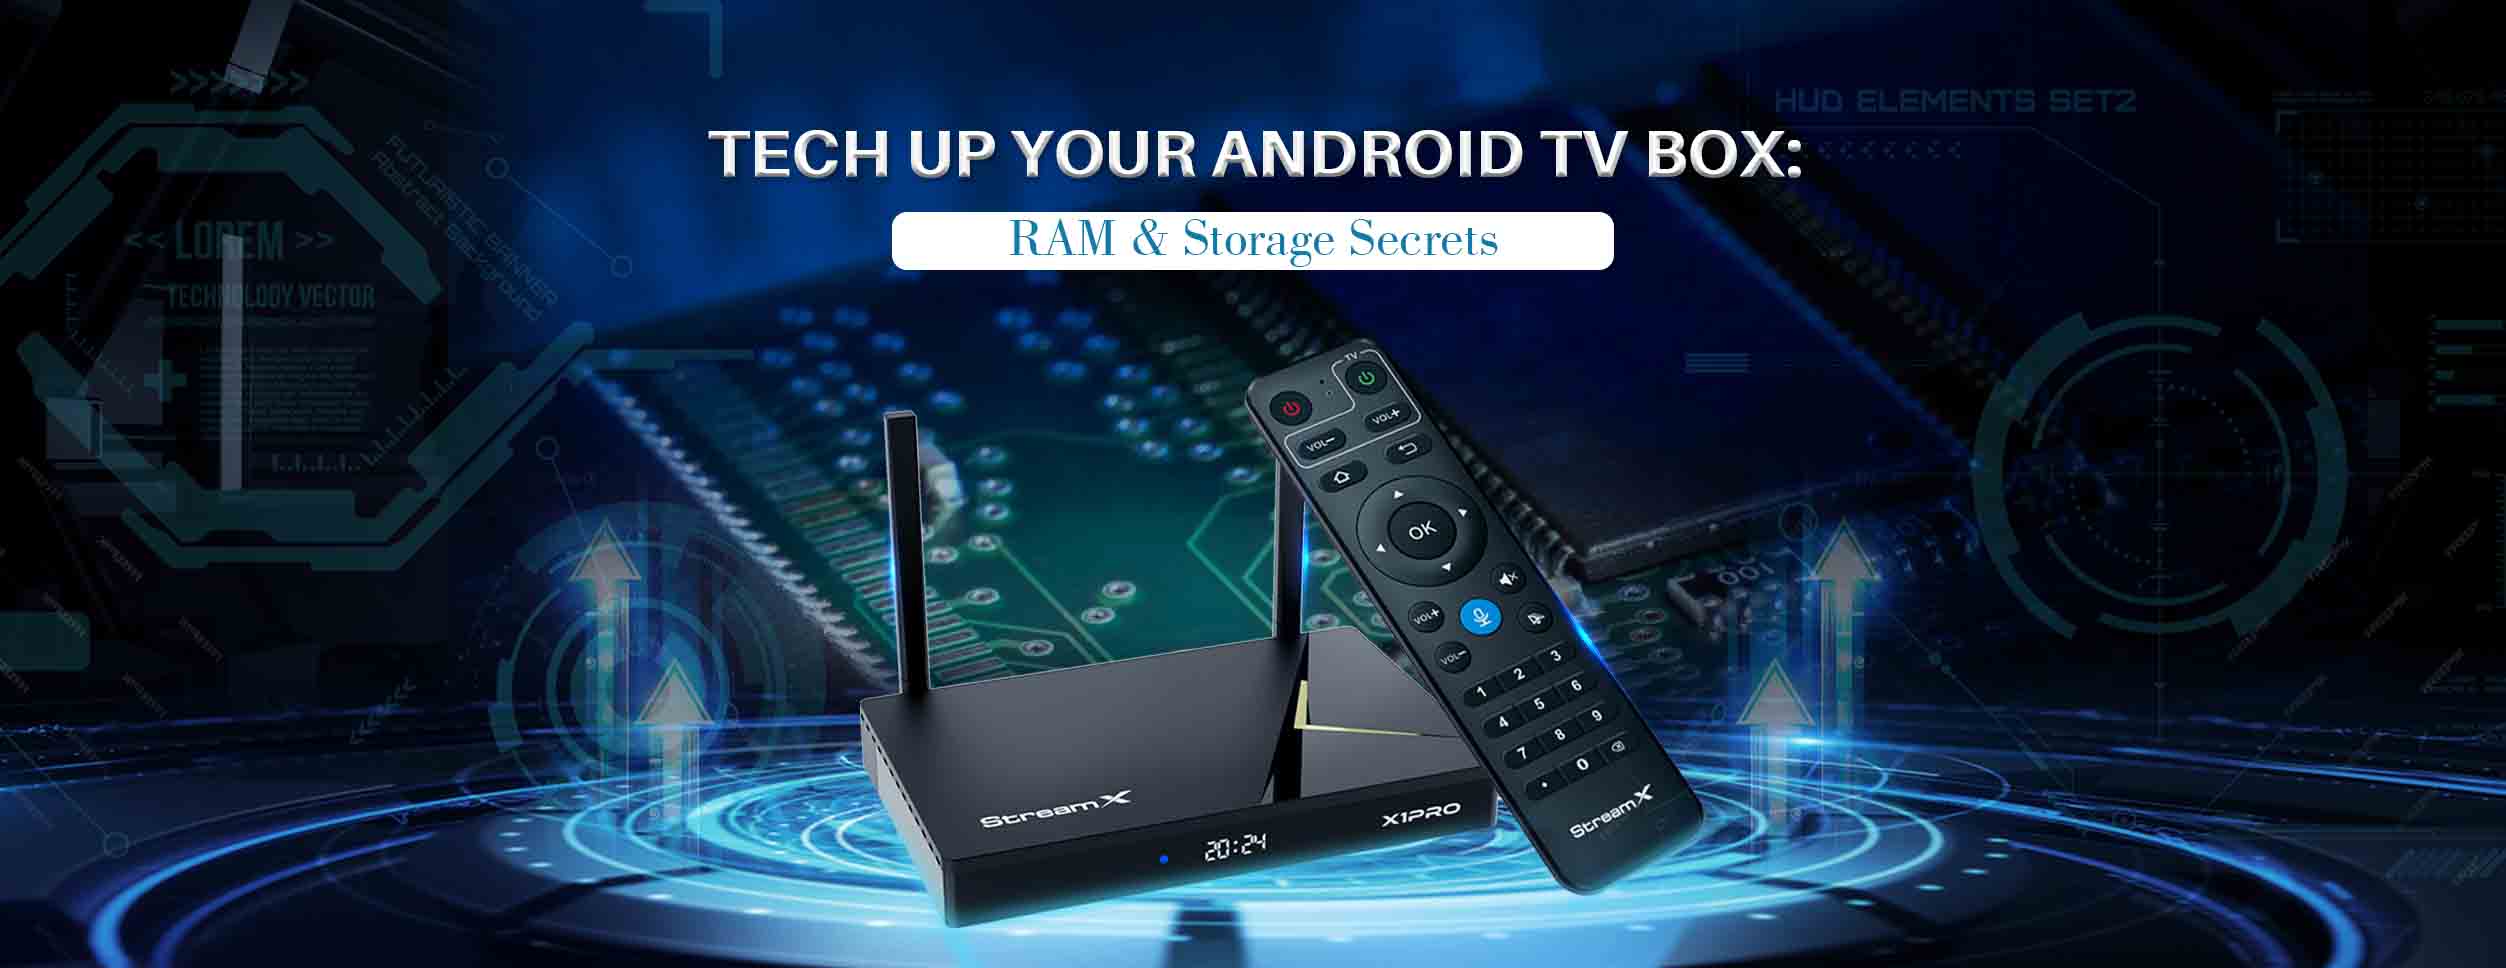 Tech-Up-Your-Android-TV-Box-RAM-and-Storage-Secrets